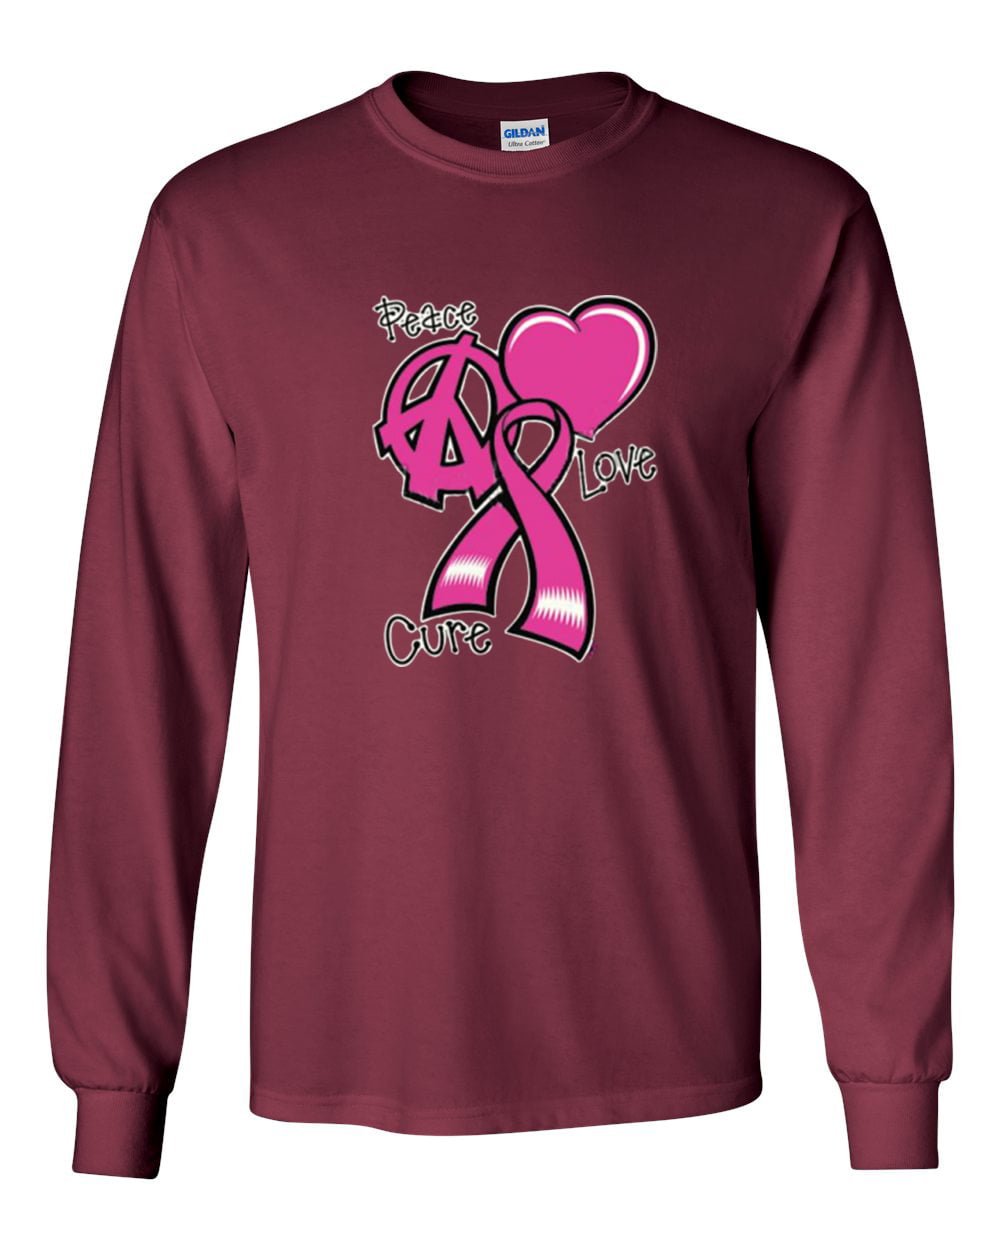 Breast Cancer Peace Love Cure In October We Wear Pink Ribbon Long Sleeve T-Shirt